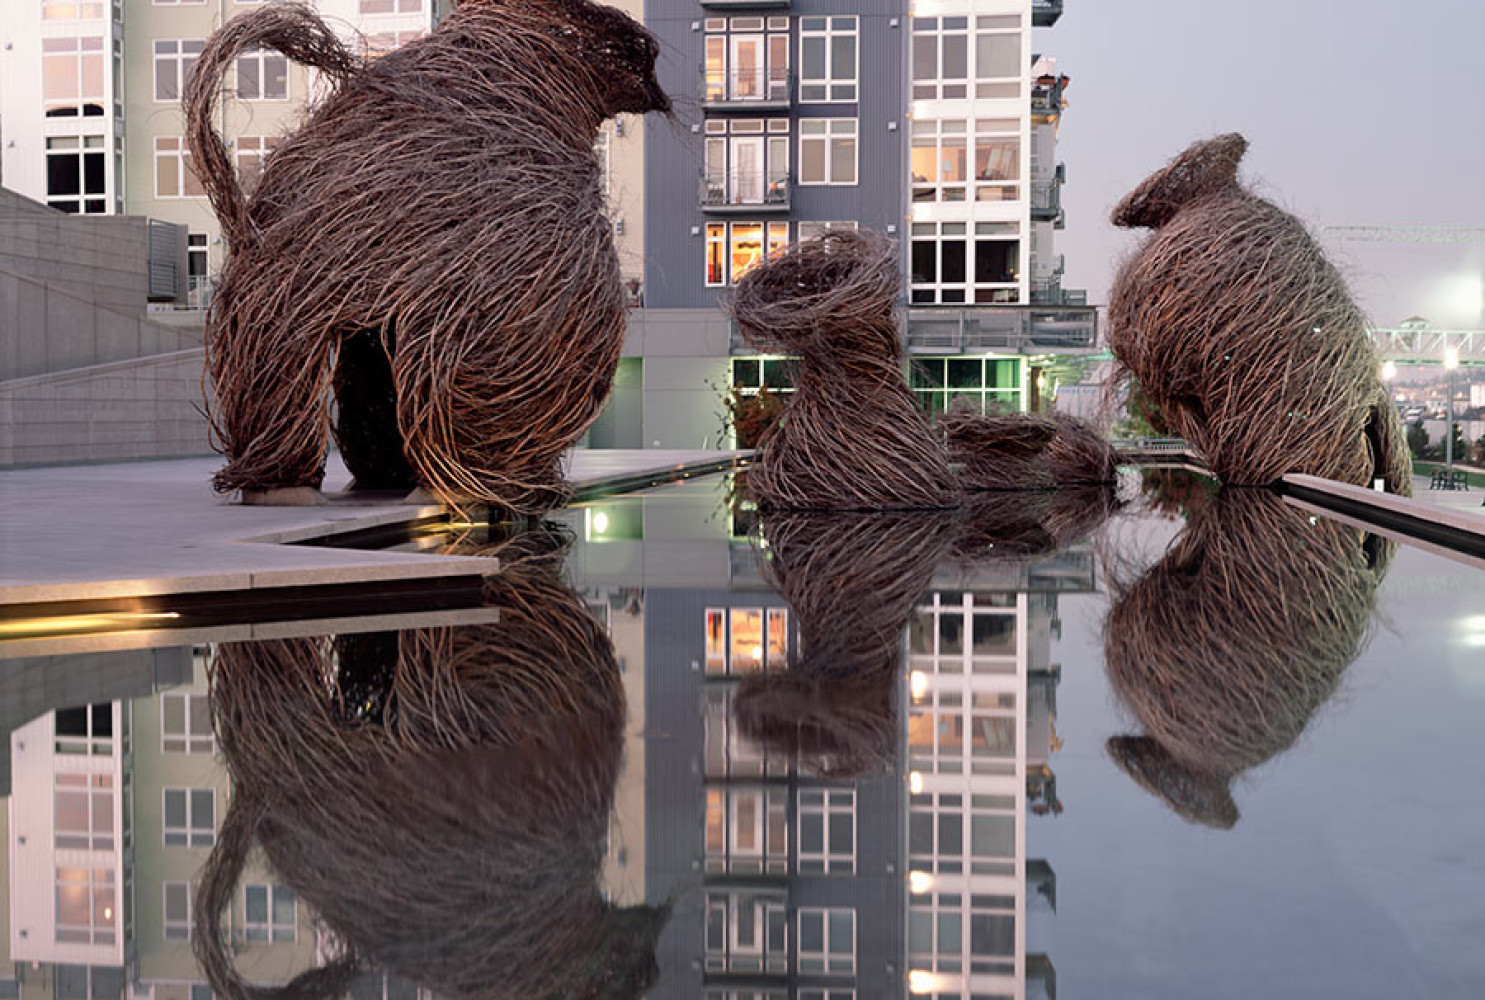 Call of the Wild, 2002, by Patrick Dougherty. Museum of Glass, Tacoma, WA. Photo: Duncan Price. 